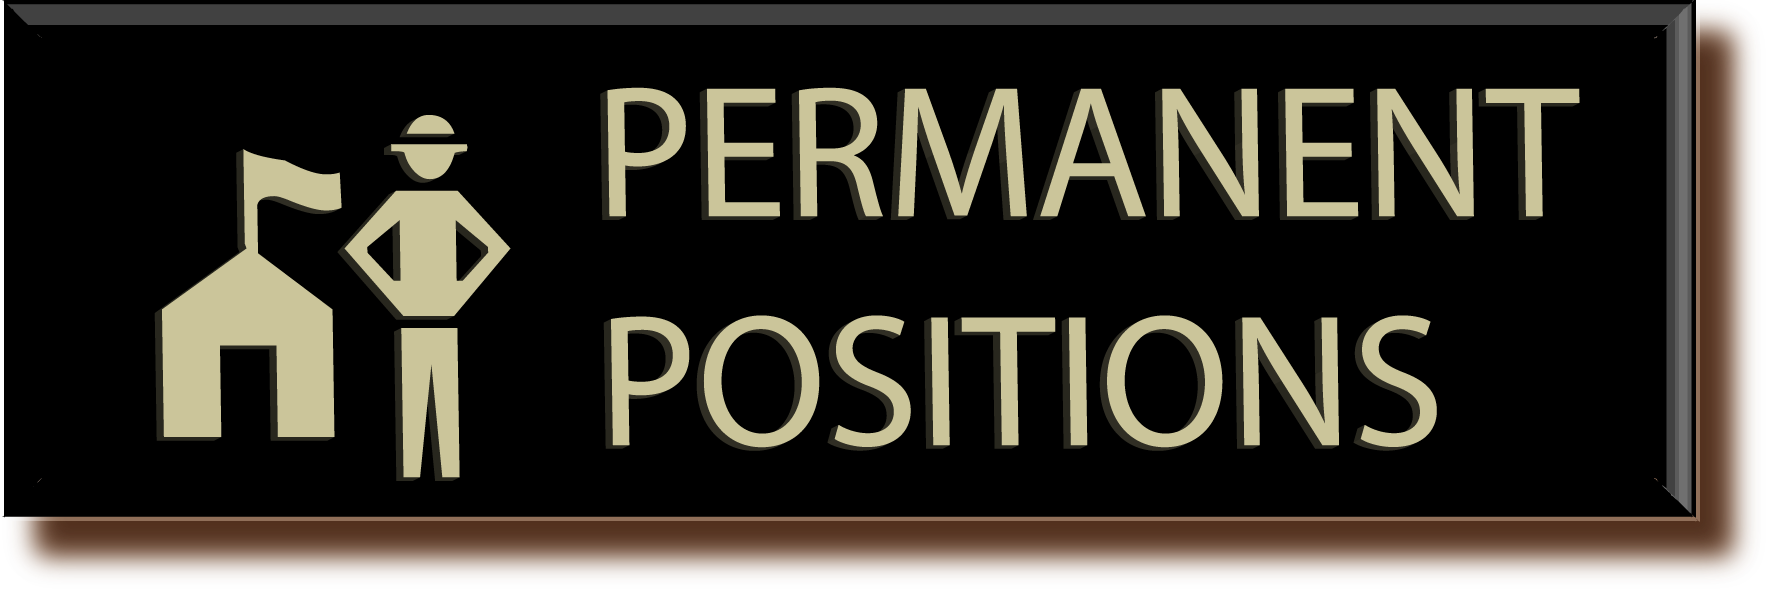 Permanent Positions